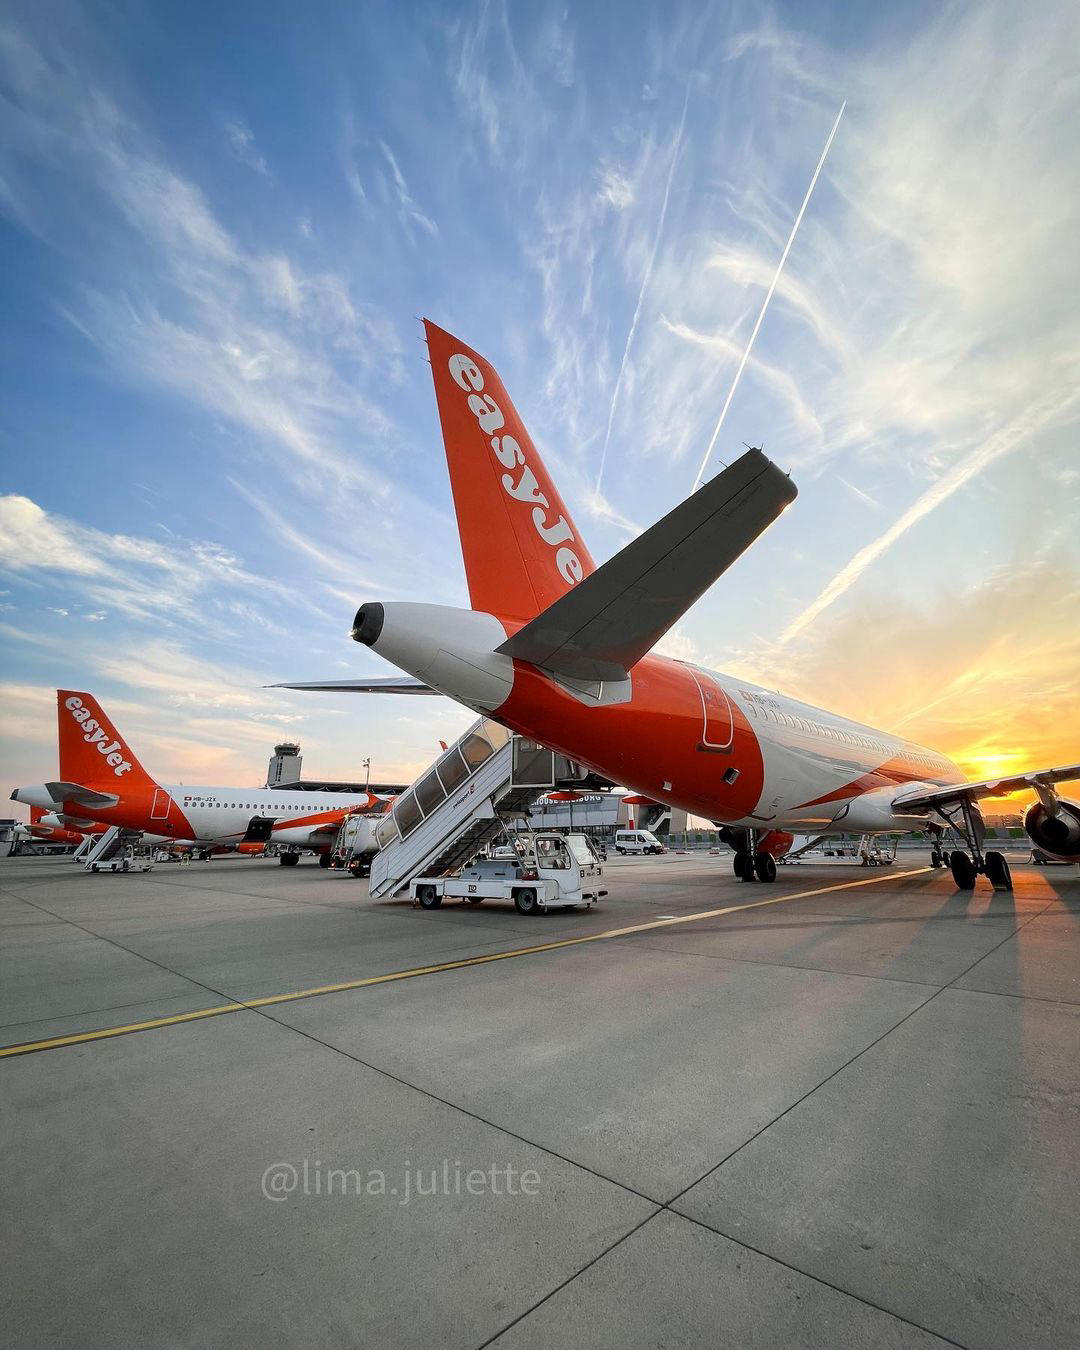 image  1 easyJet - Sunrise views don’t get much better than this